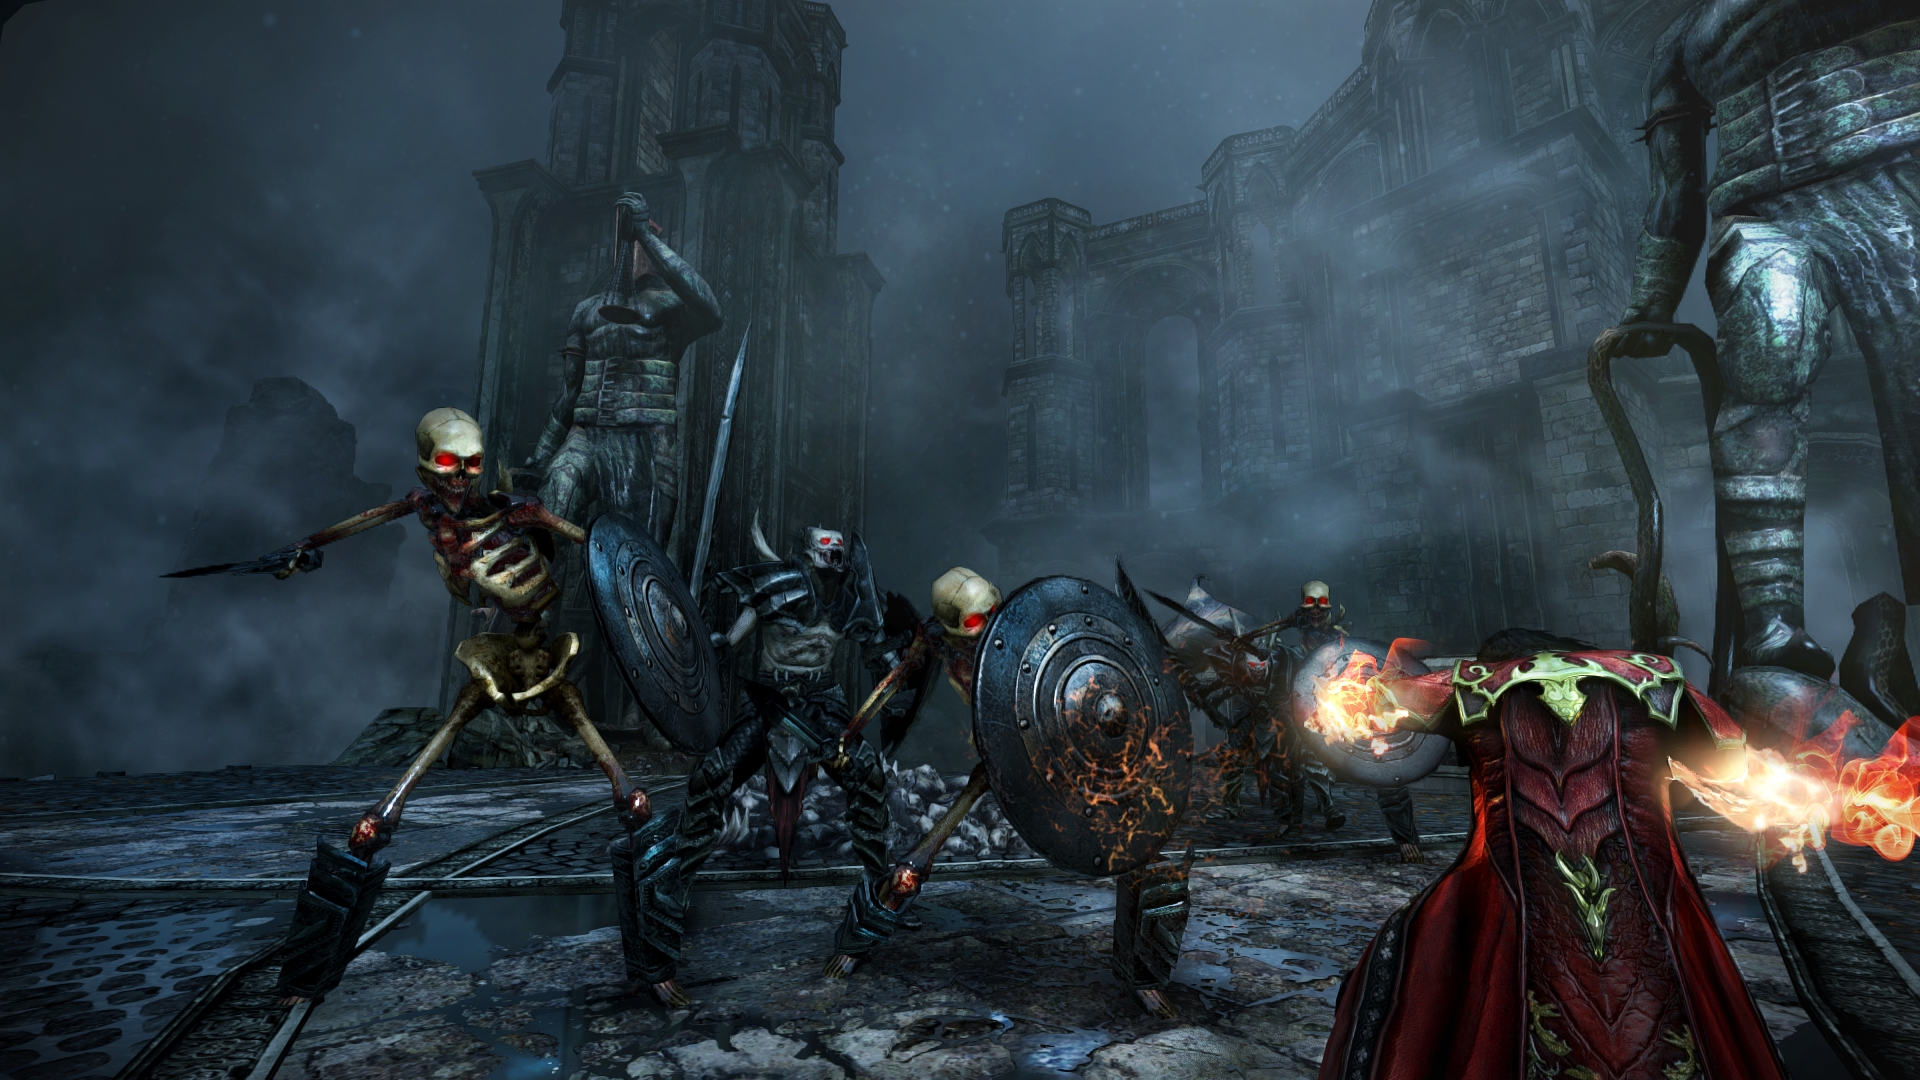 Review: Castlevania: Lords of Shadow 2 - Hardcore Gamer